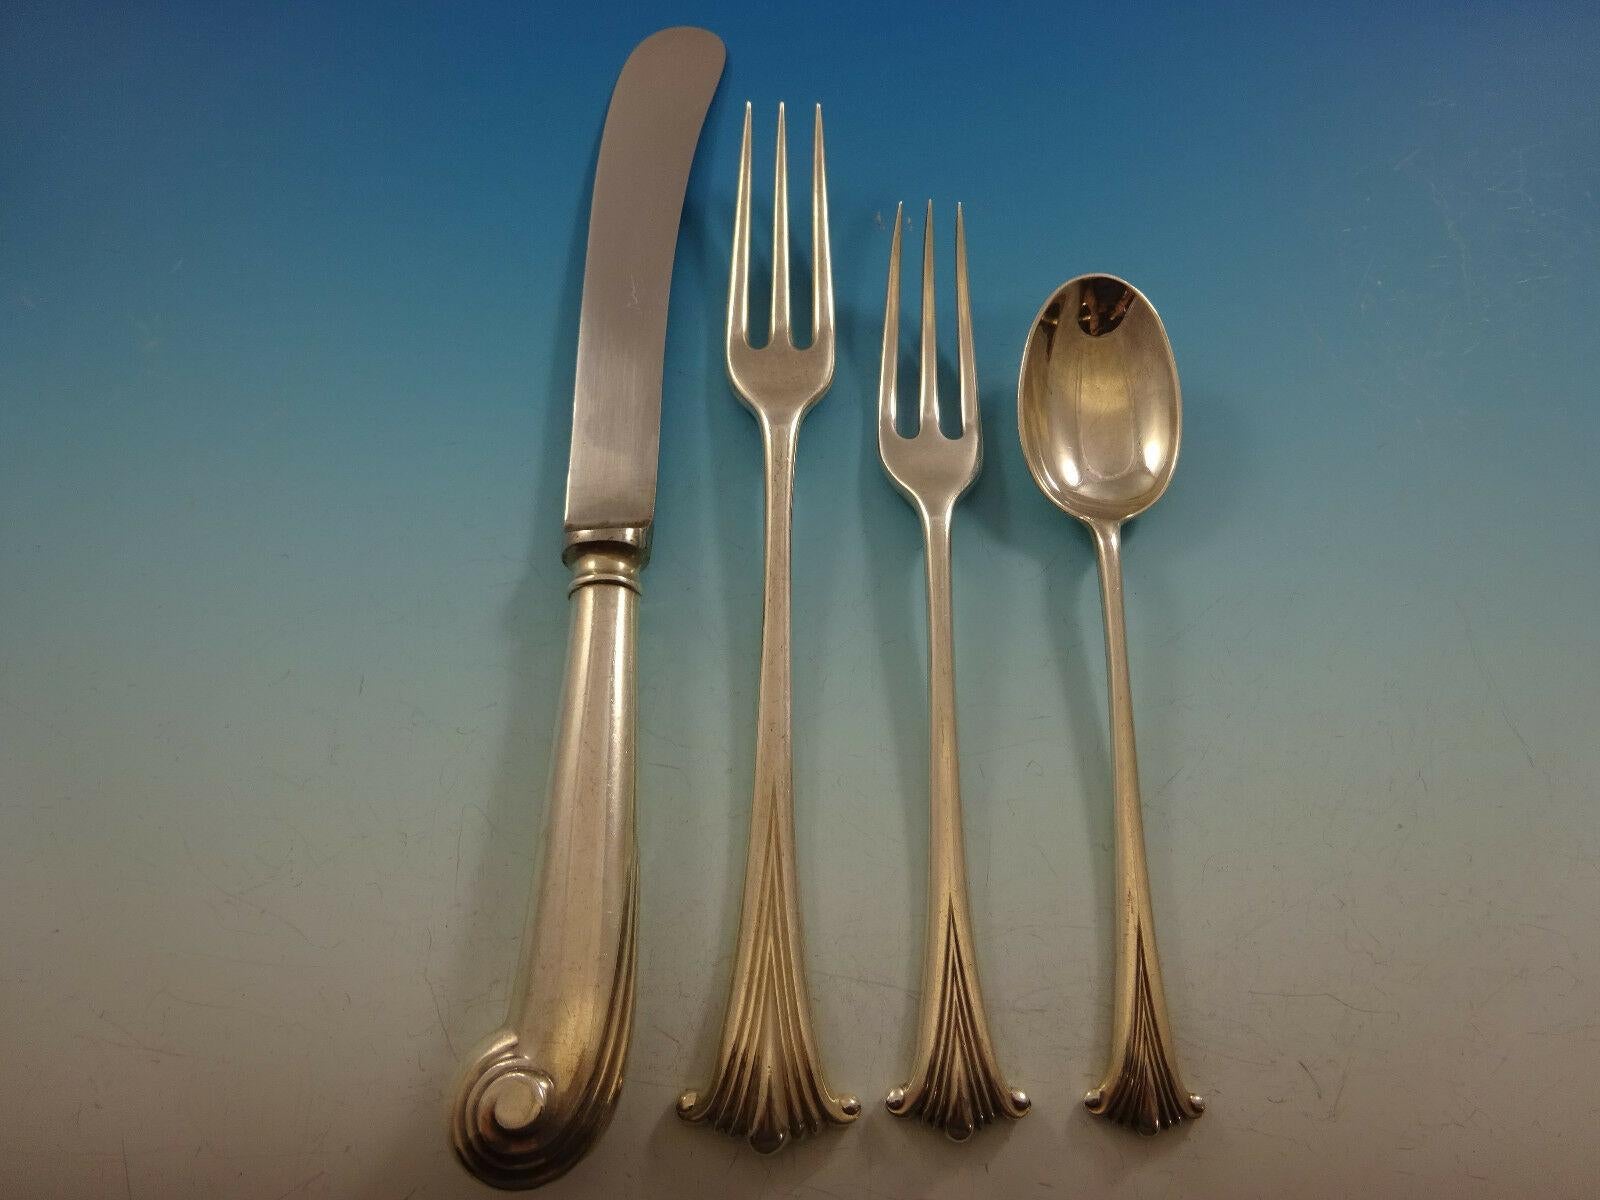 Onlsow by James Robinson

For 70 years, James Robinson has been selling exquisite handmade sterling silver flatware in Sheffield, England. Today, the silver is still made in the traditional way. They start with a rectangular strip of silver, then